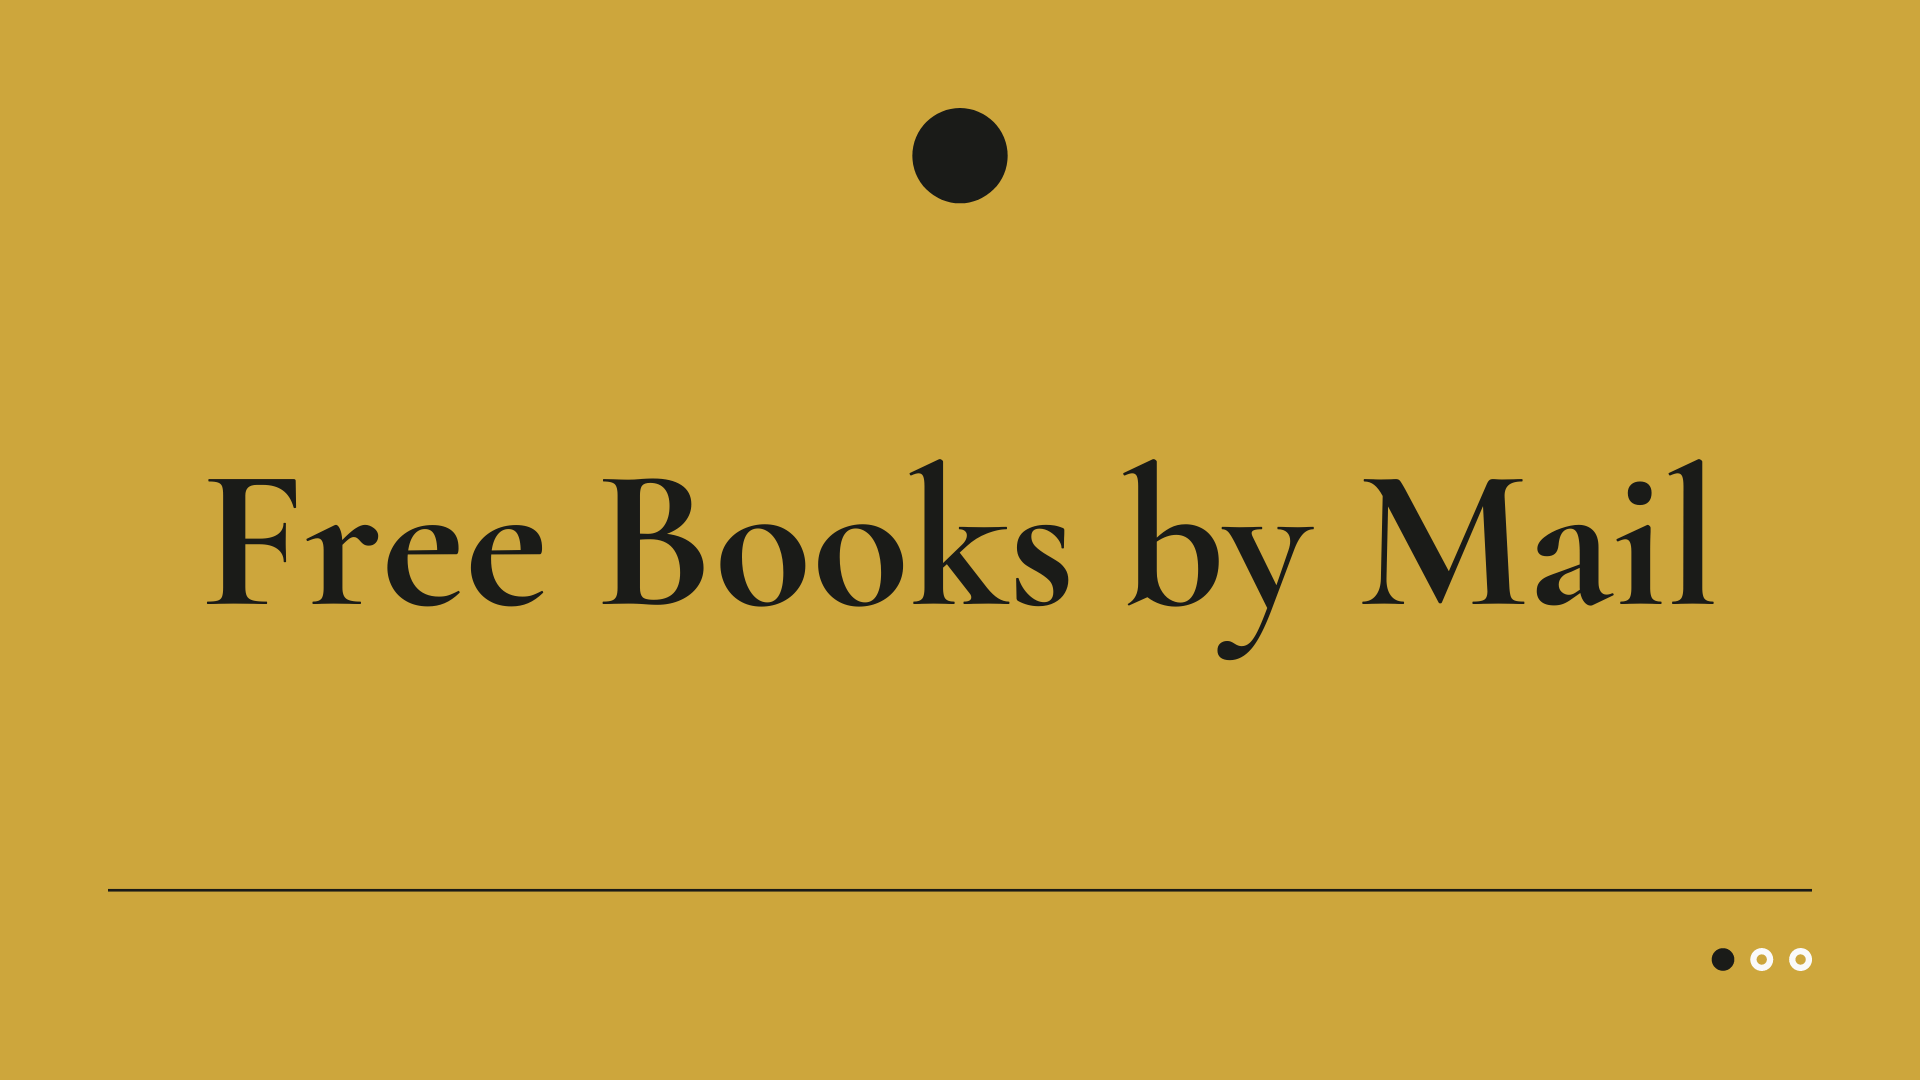 get free books by mail worldwide